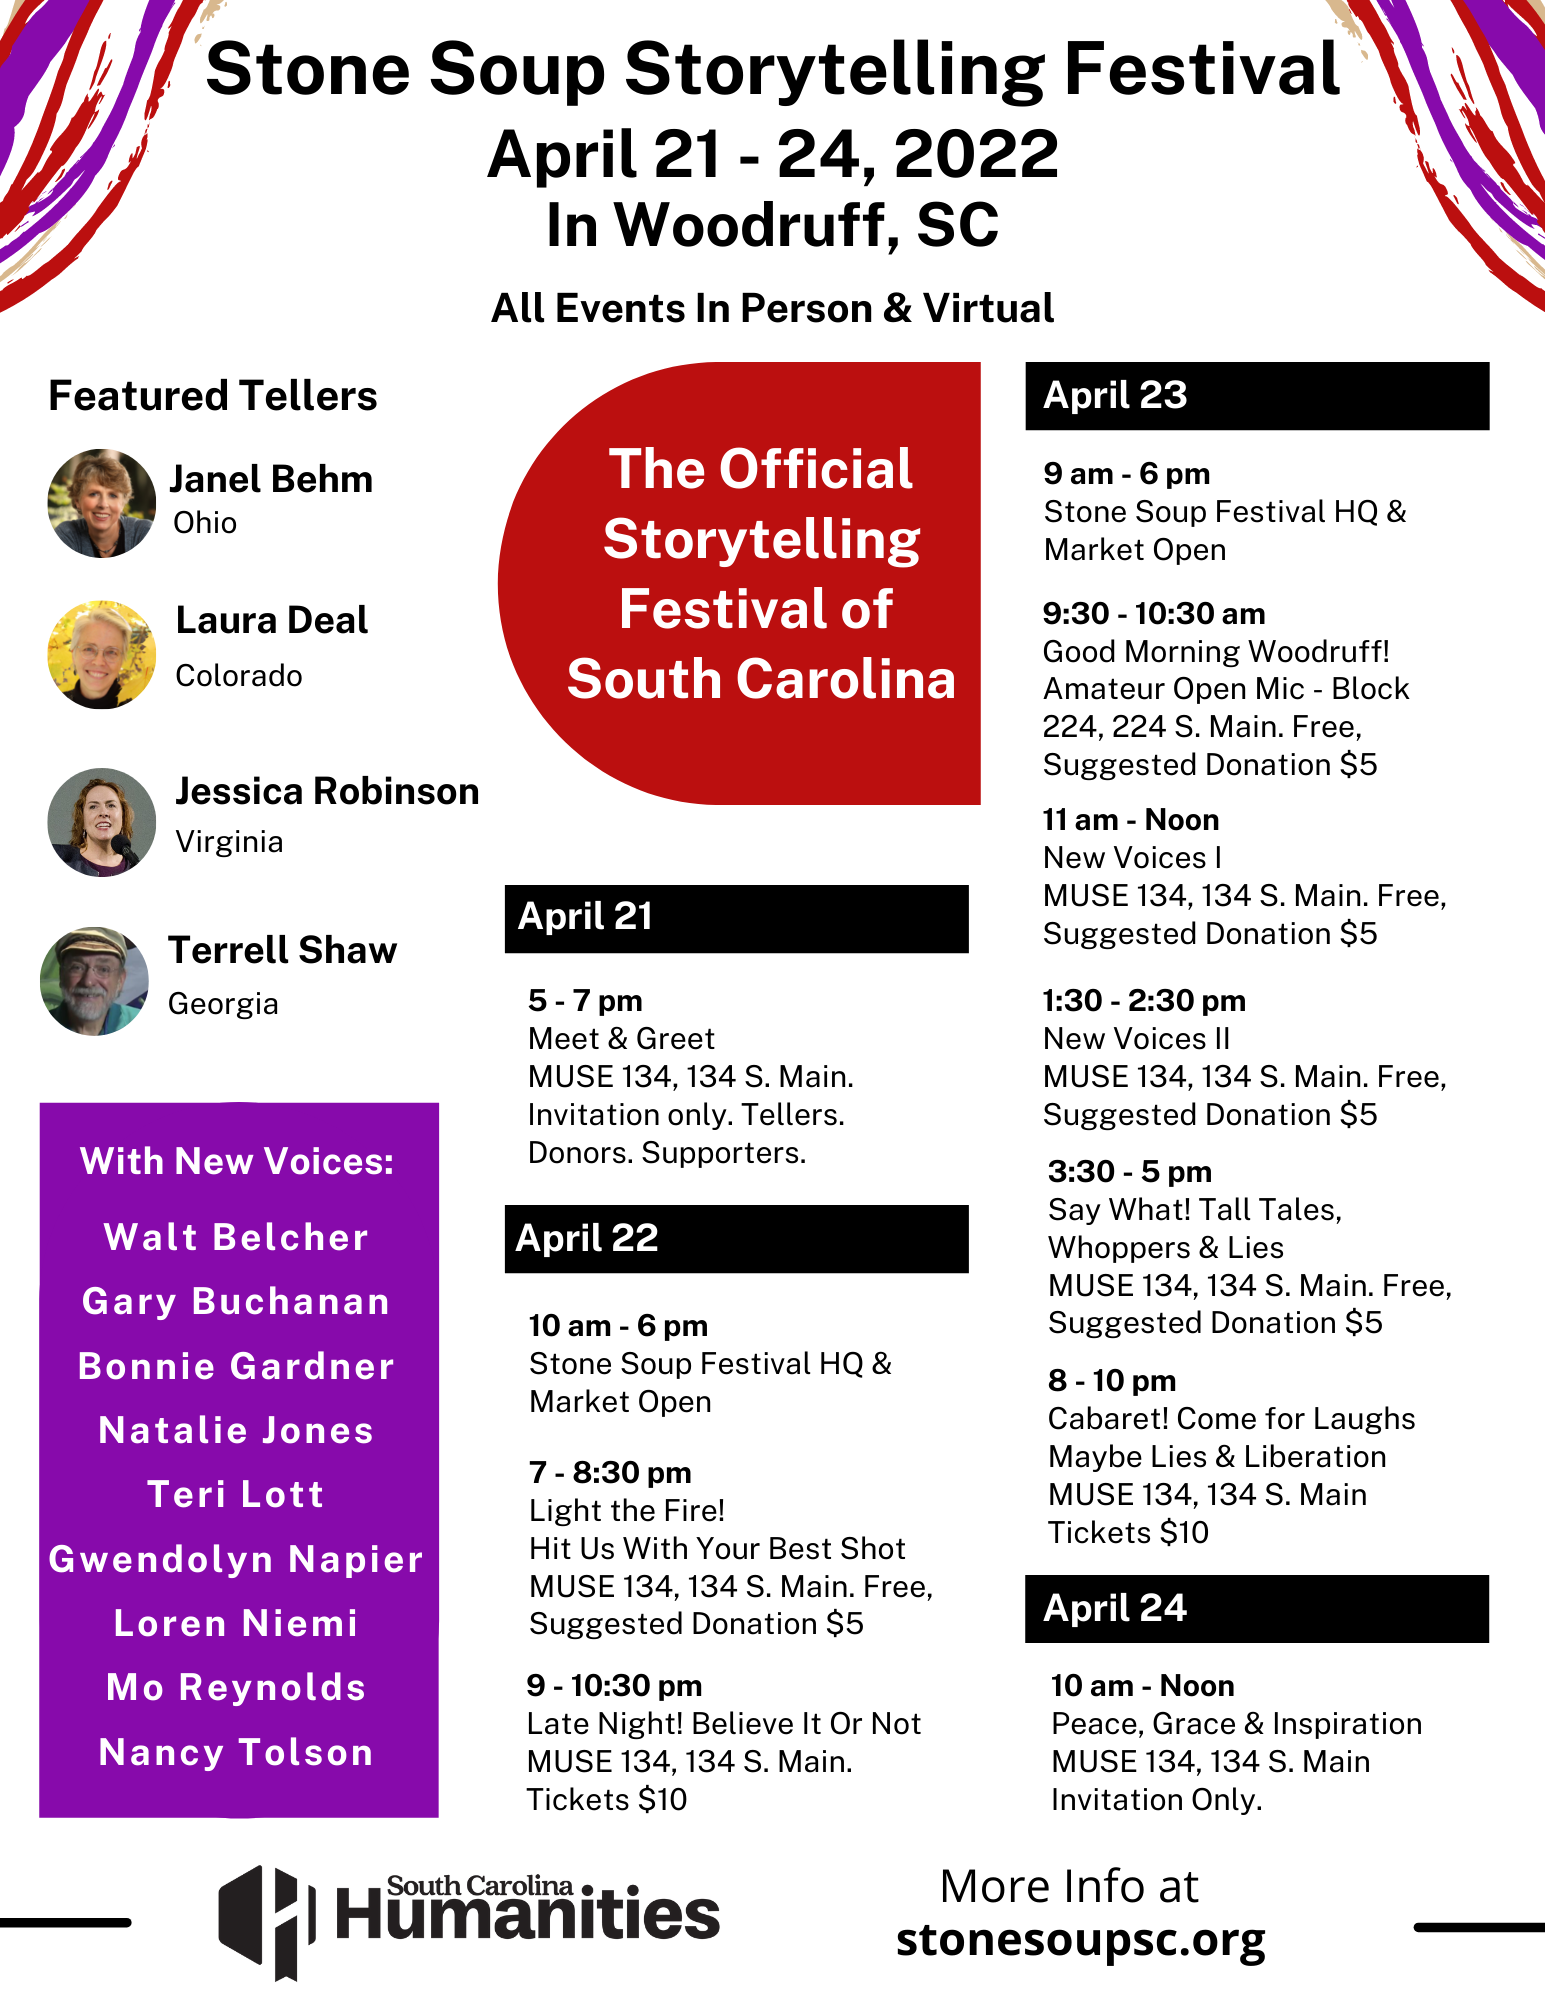 Stone Soup Storytelling Festival flyer with schedule. Full text after image.